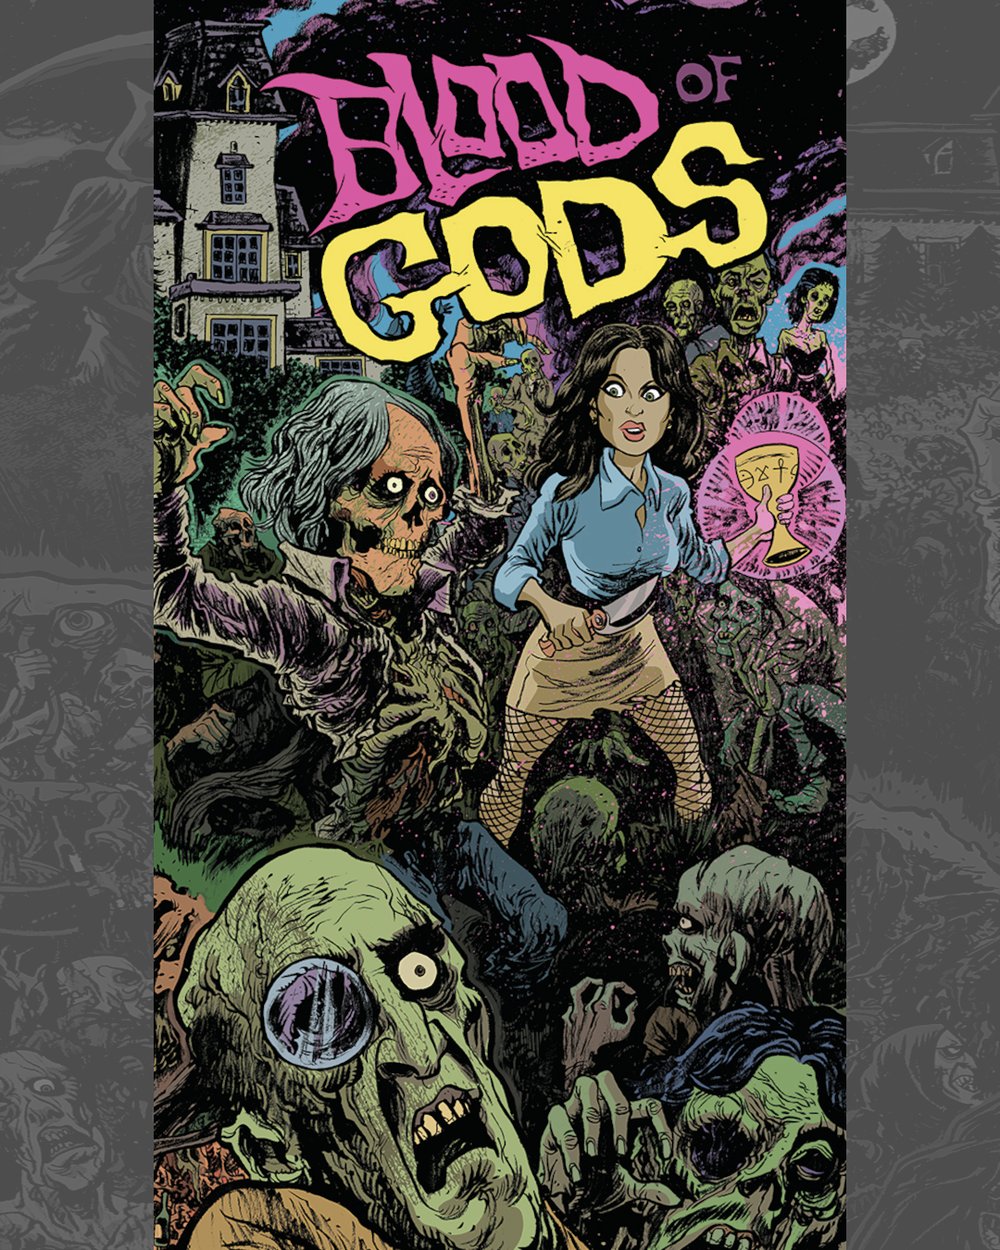 Blood Of Gods #9 - Spring/Summer '24 issue!